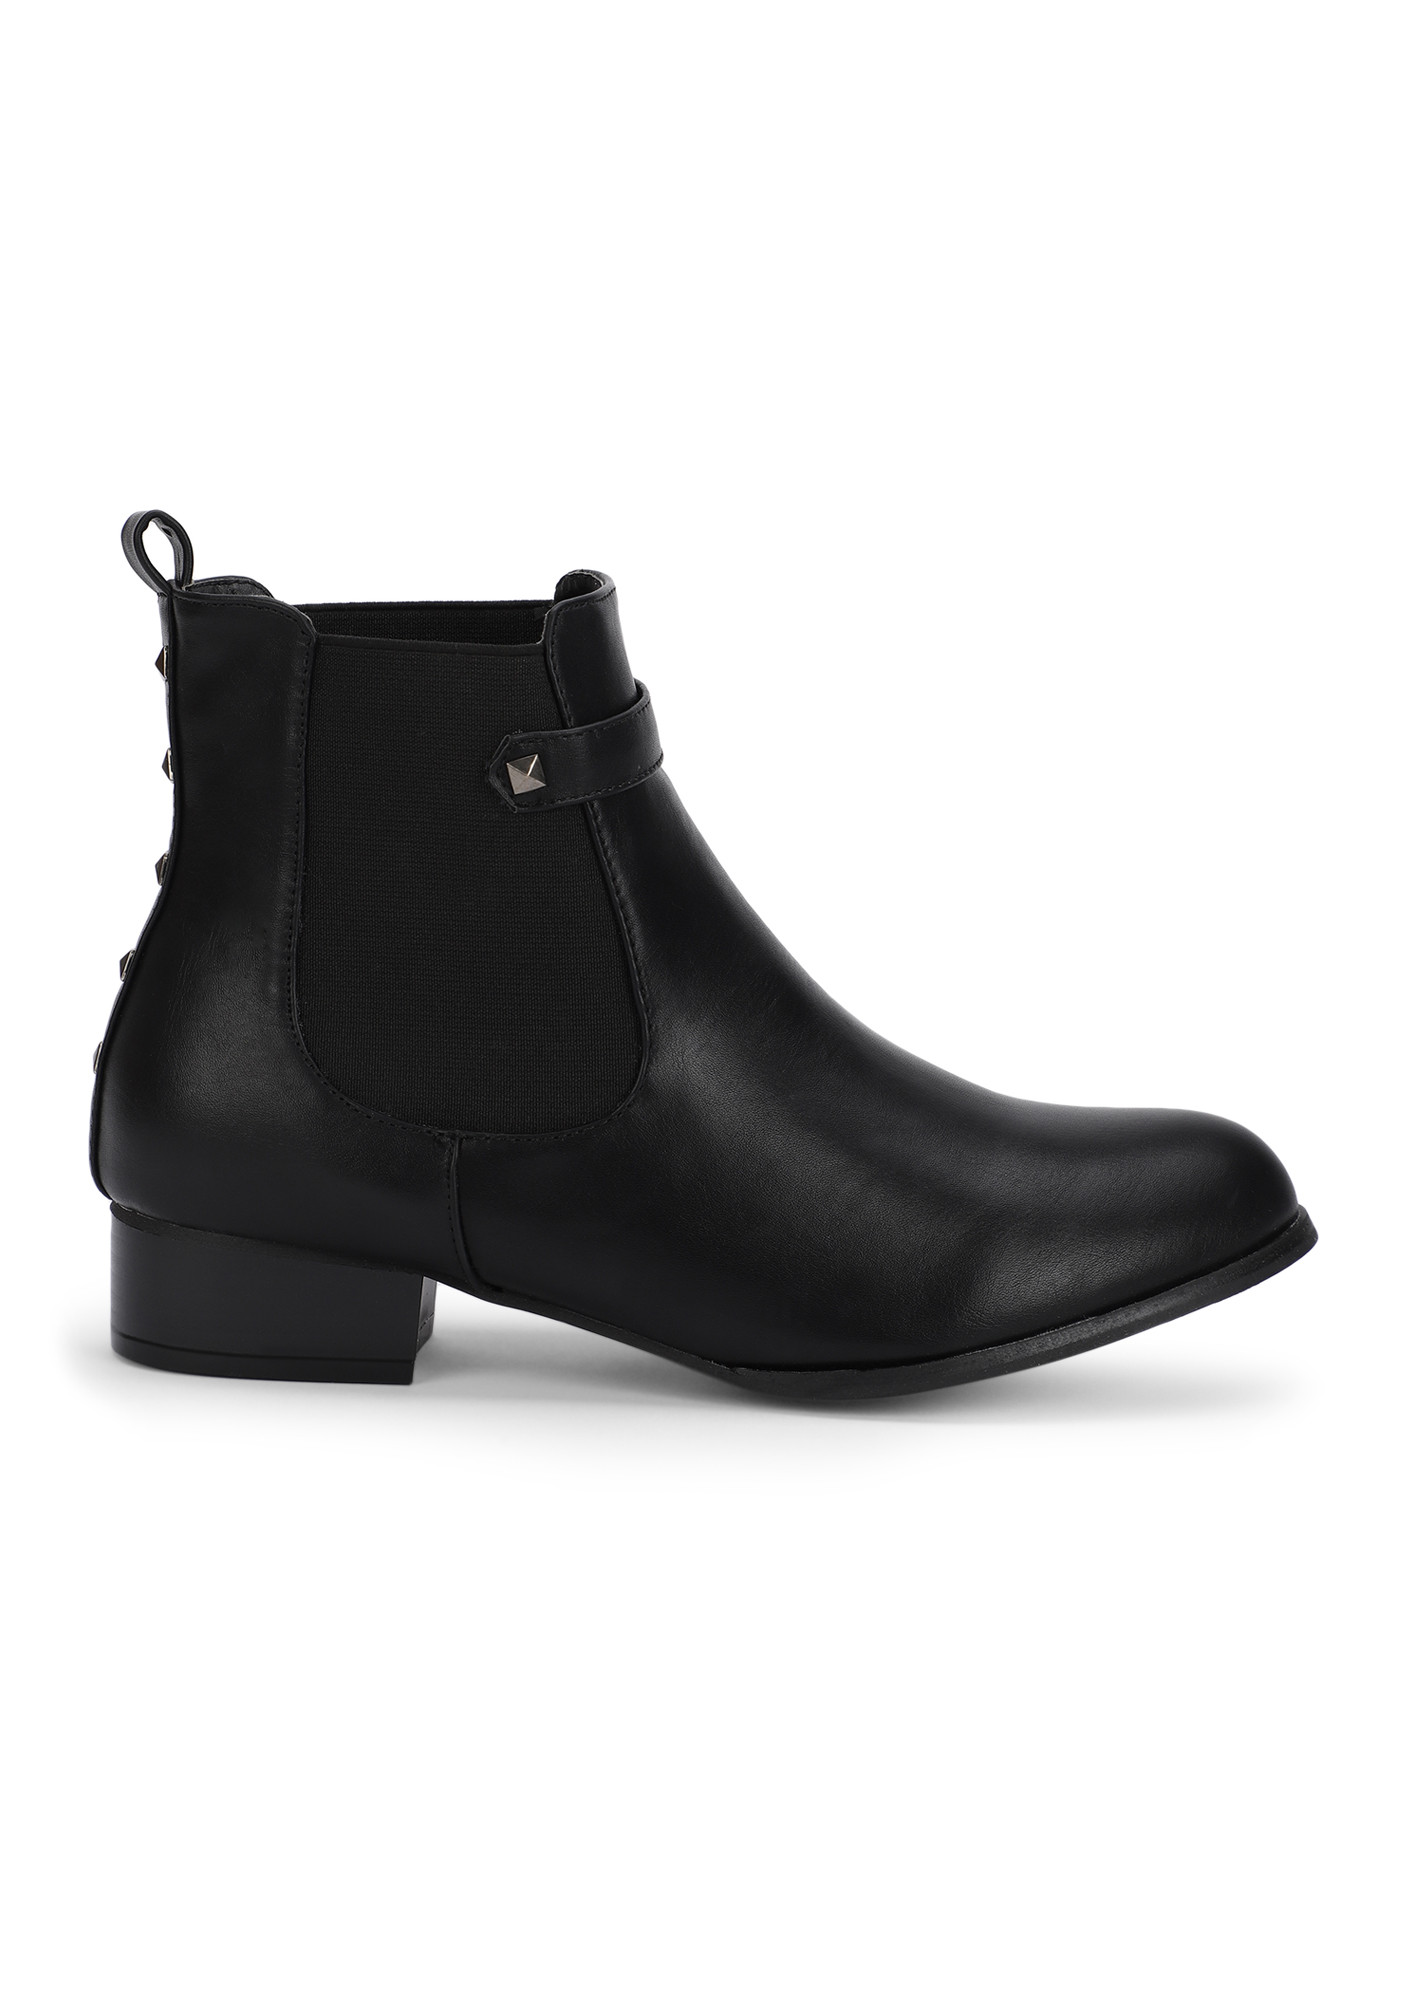 WE ARE LOVING IT BLACK ANKLE BOOTS